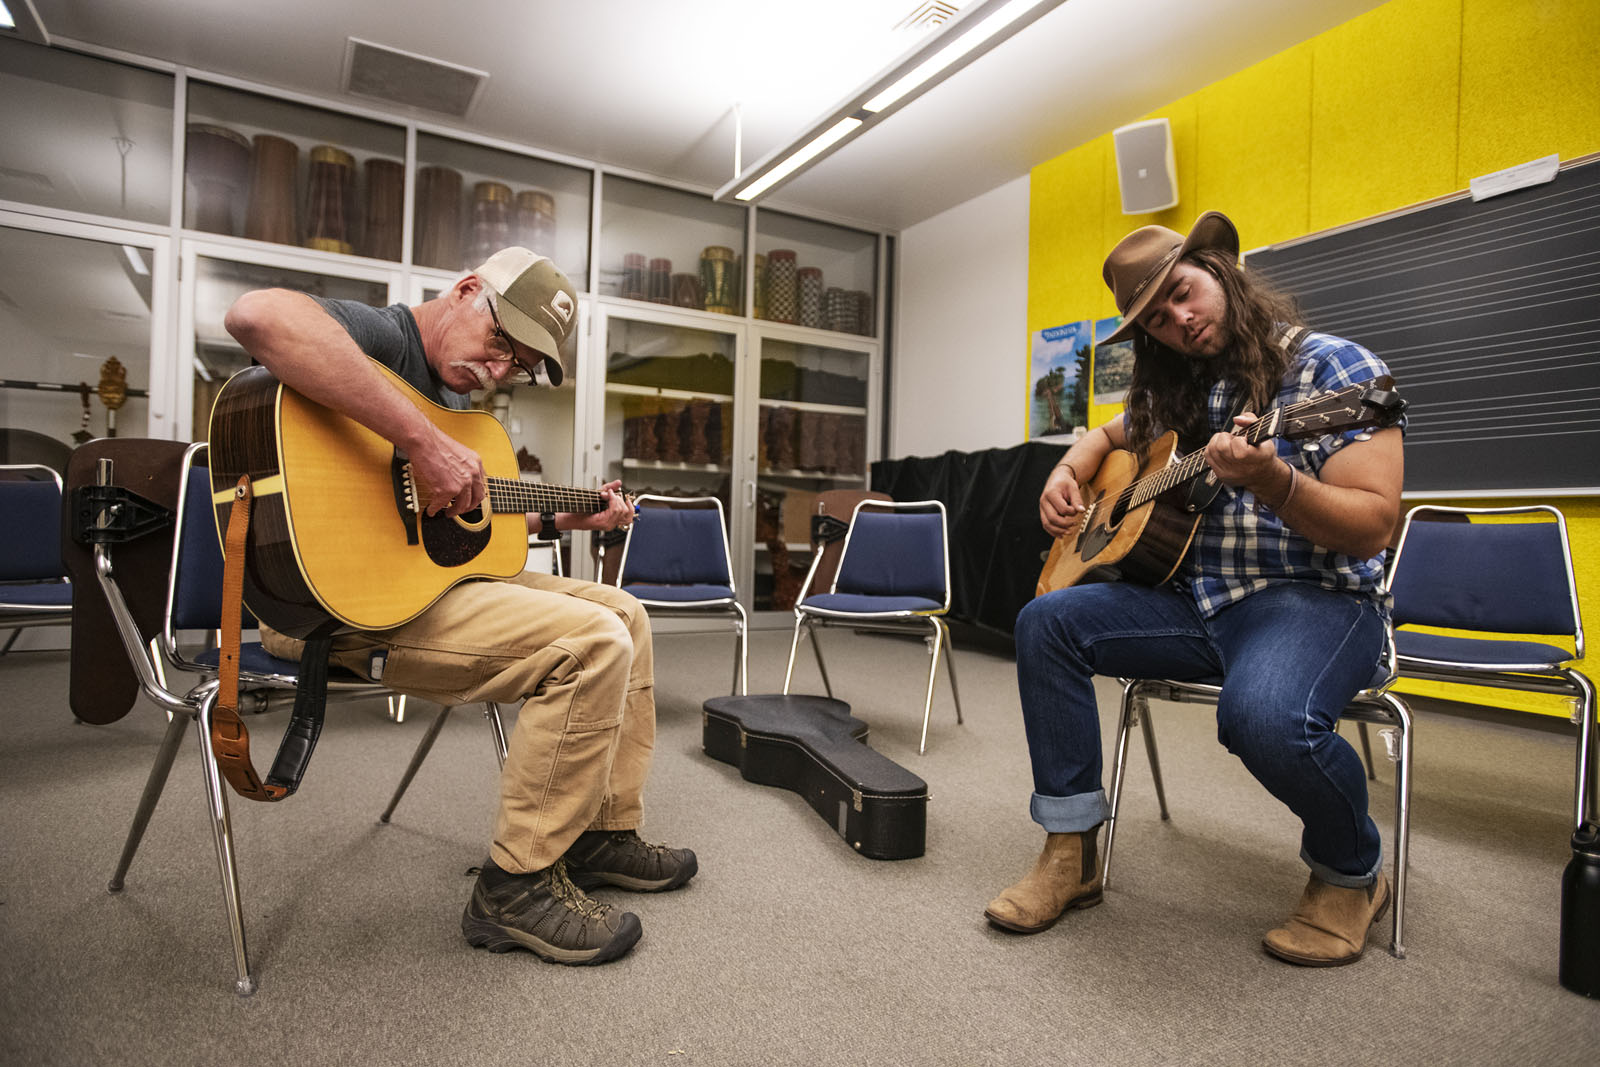 Kenn Lee from Breckenridge and Garrett Blackwell ’17 play a newly learned song together during the Bluegrass Workshop in Packard Hall on June 26, 2018.